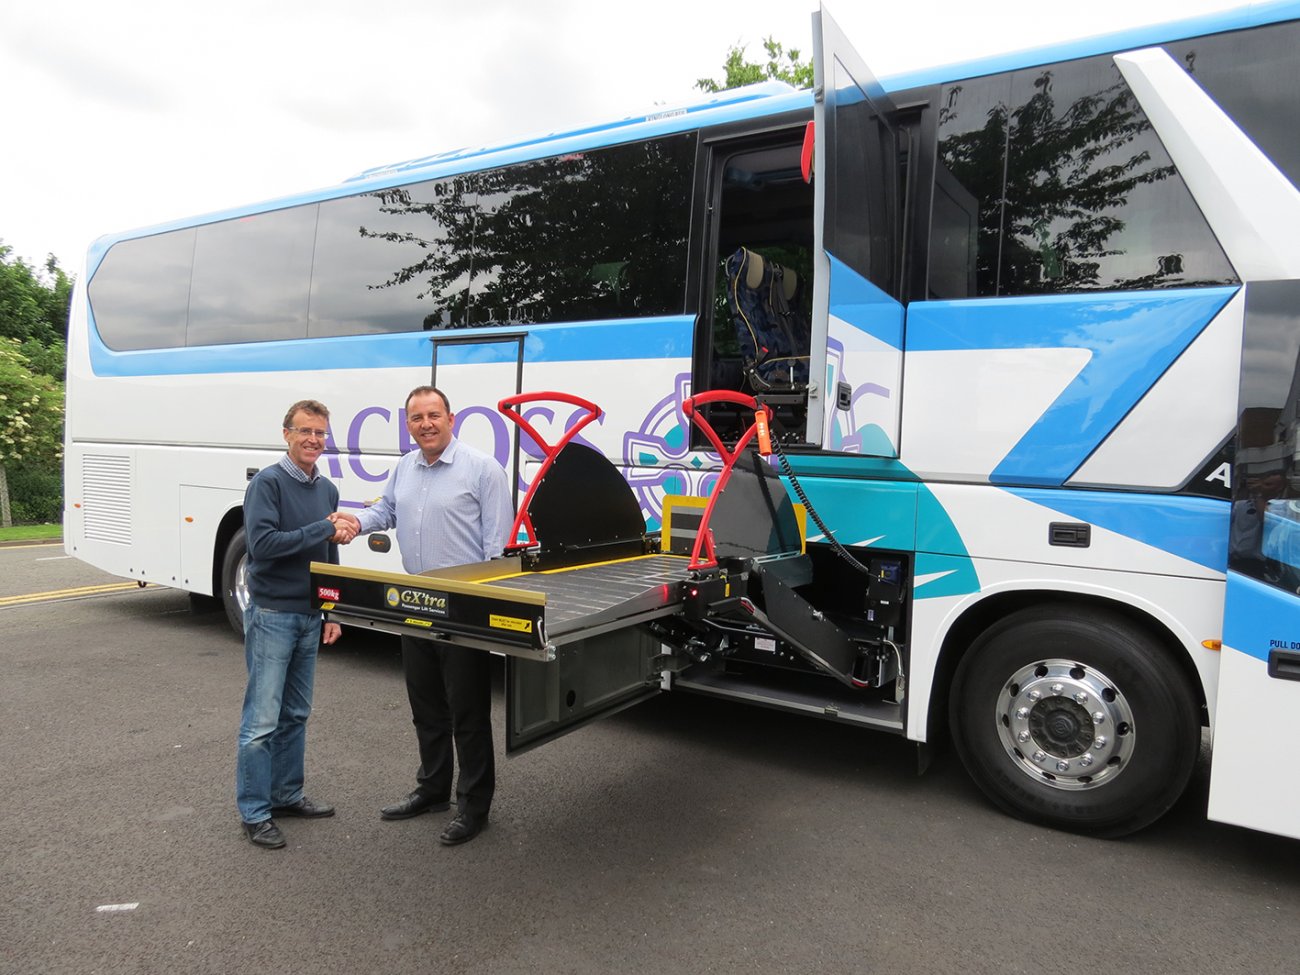 PLS installs pioneering passenger stretcher lift to bespoke accessible care coach